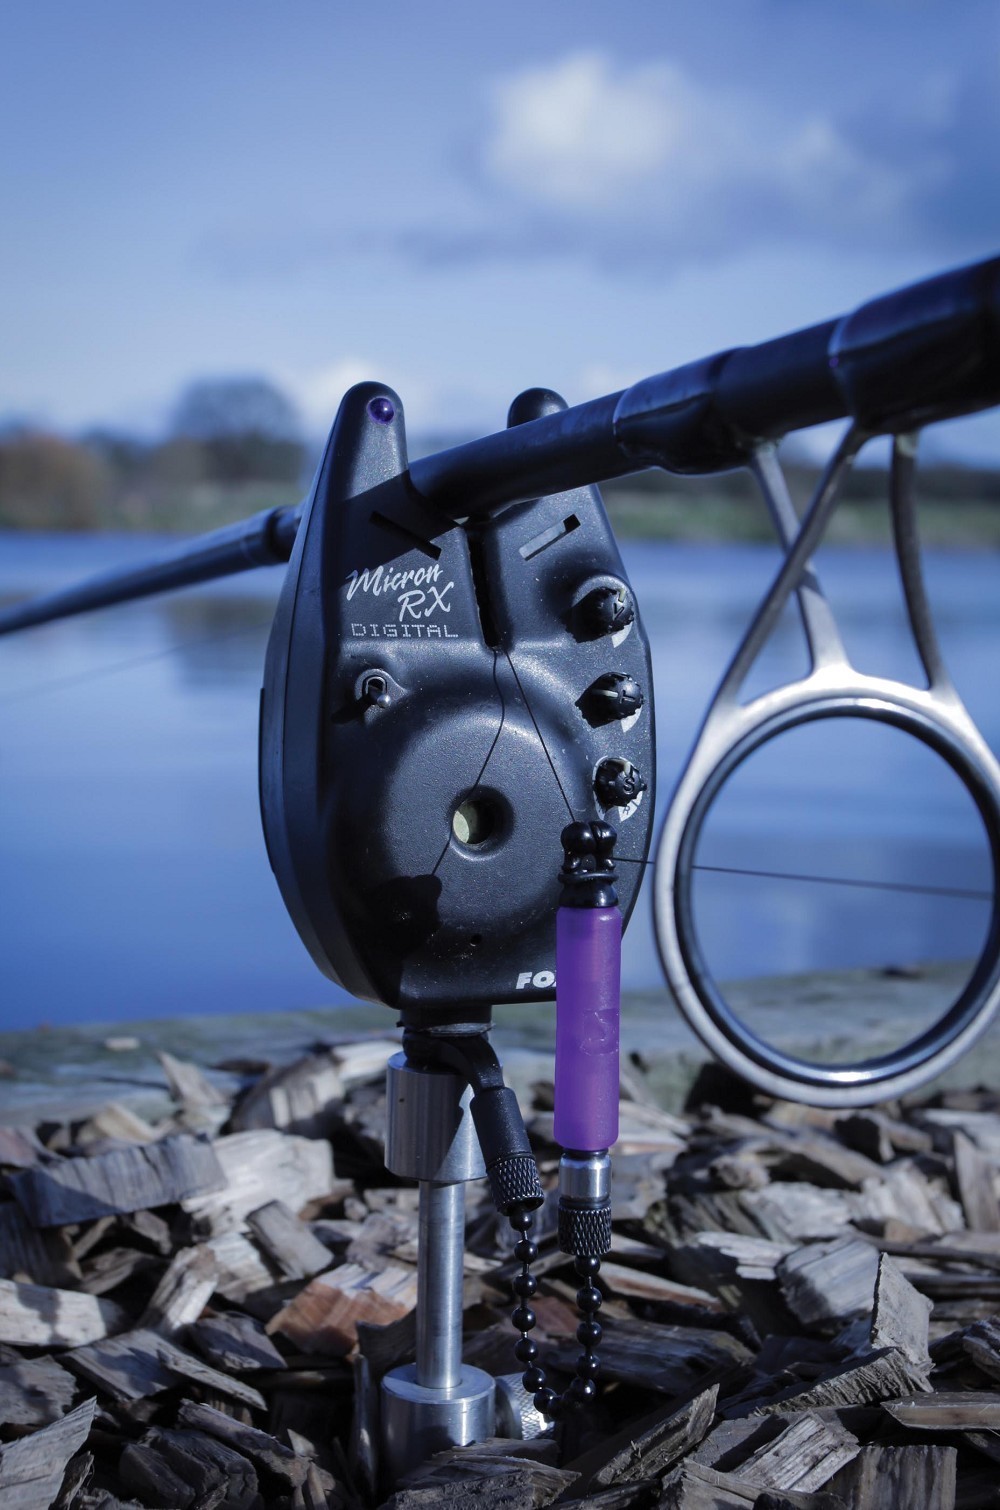 Why you should watch your bobbins